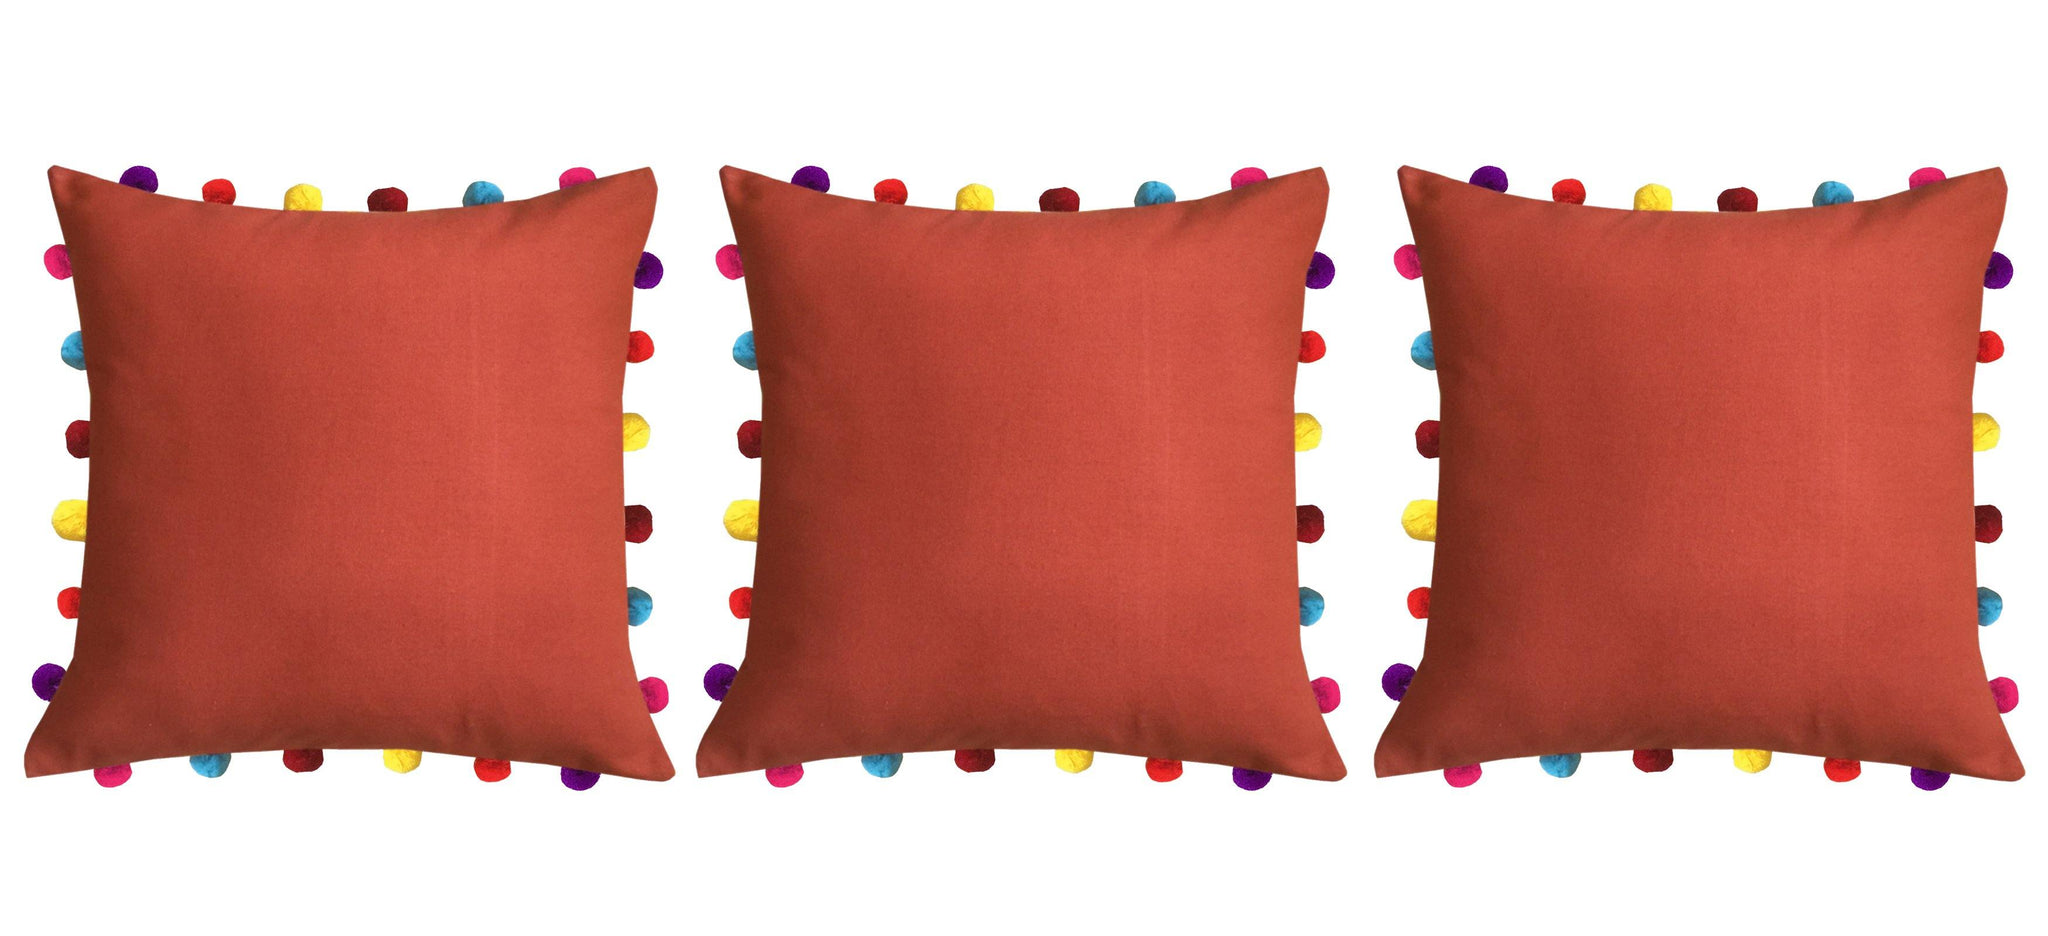 Lushomes Red Wood Cushion Cover with Colorful Pom pom (3 pcs, 18 x 18”) - Lushomes